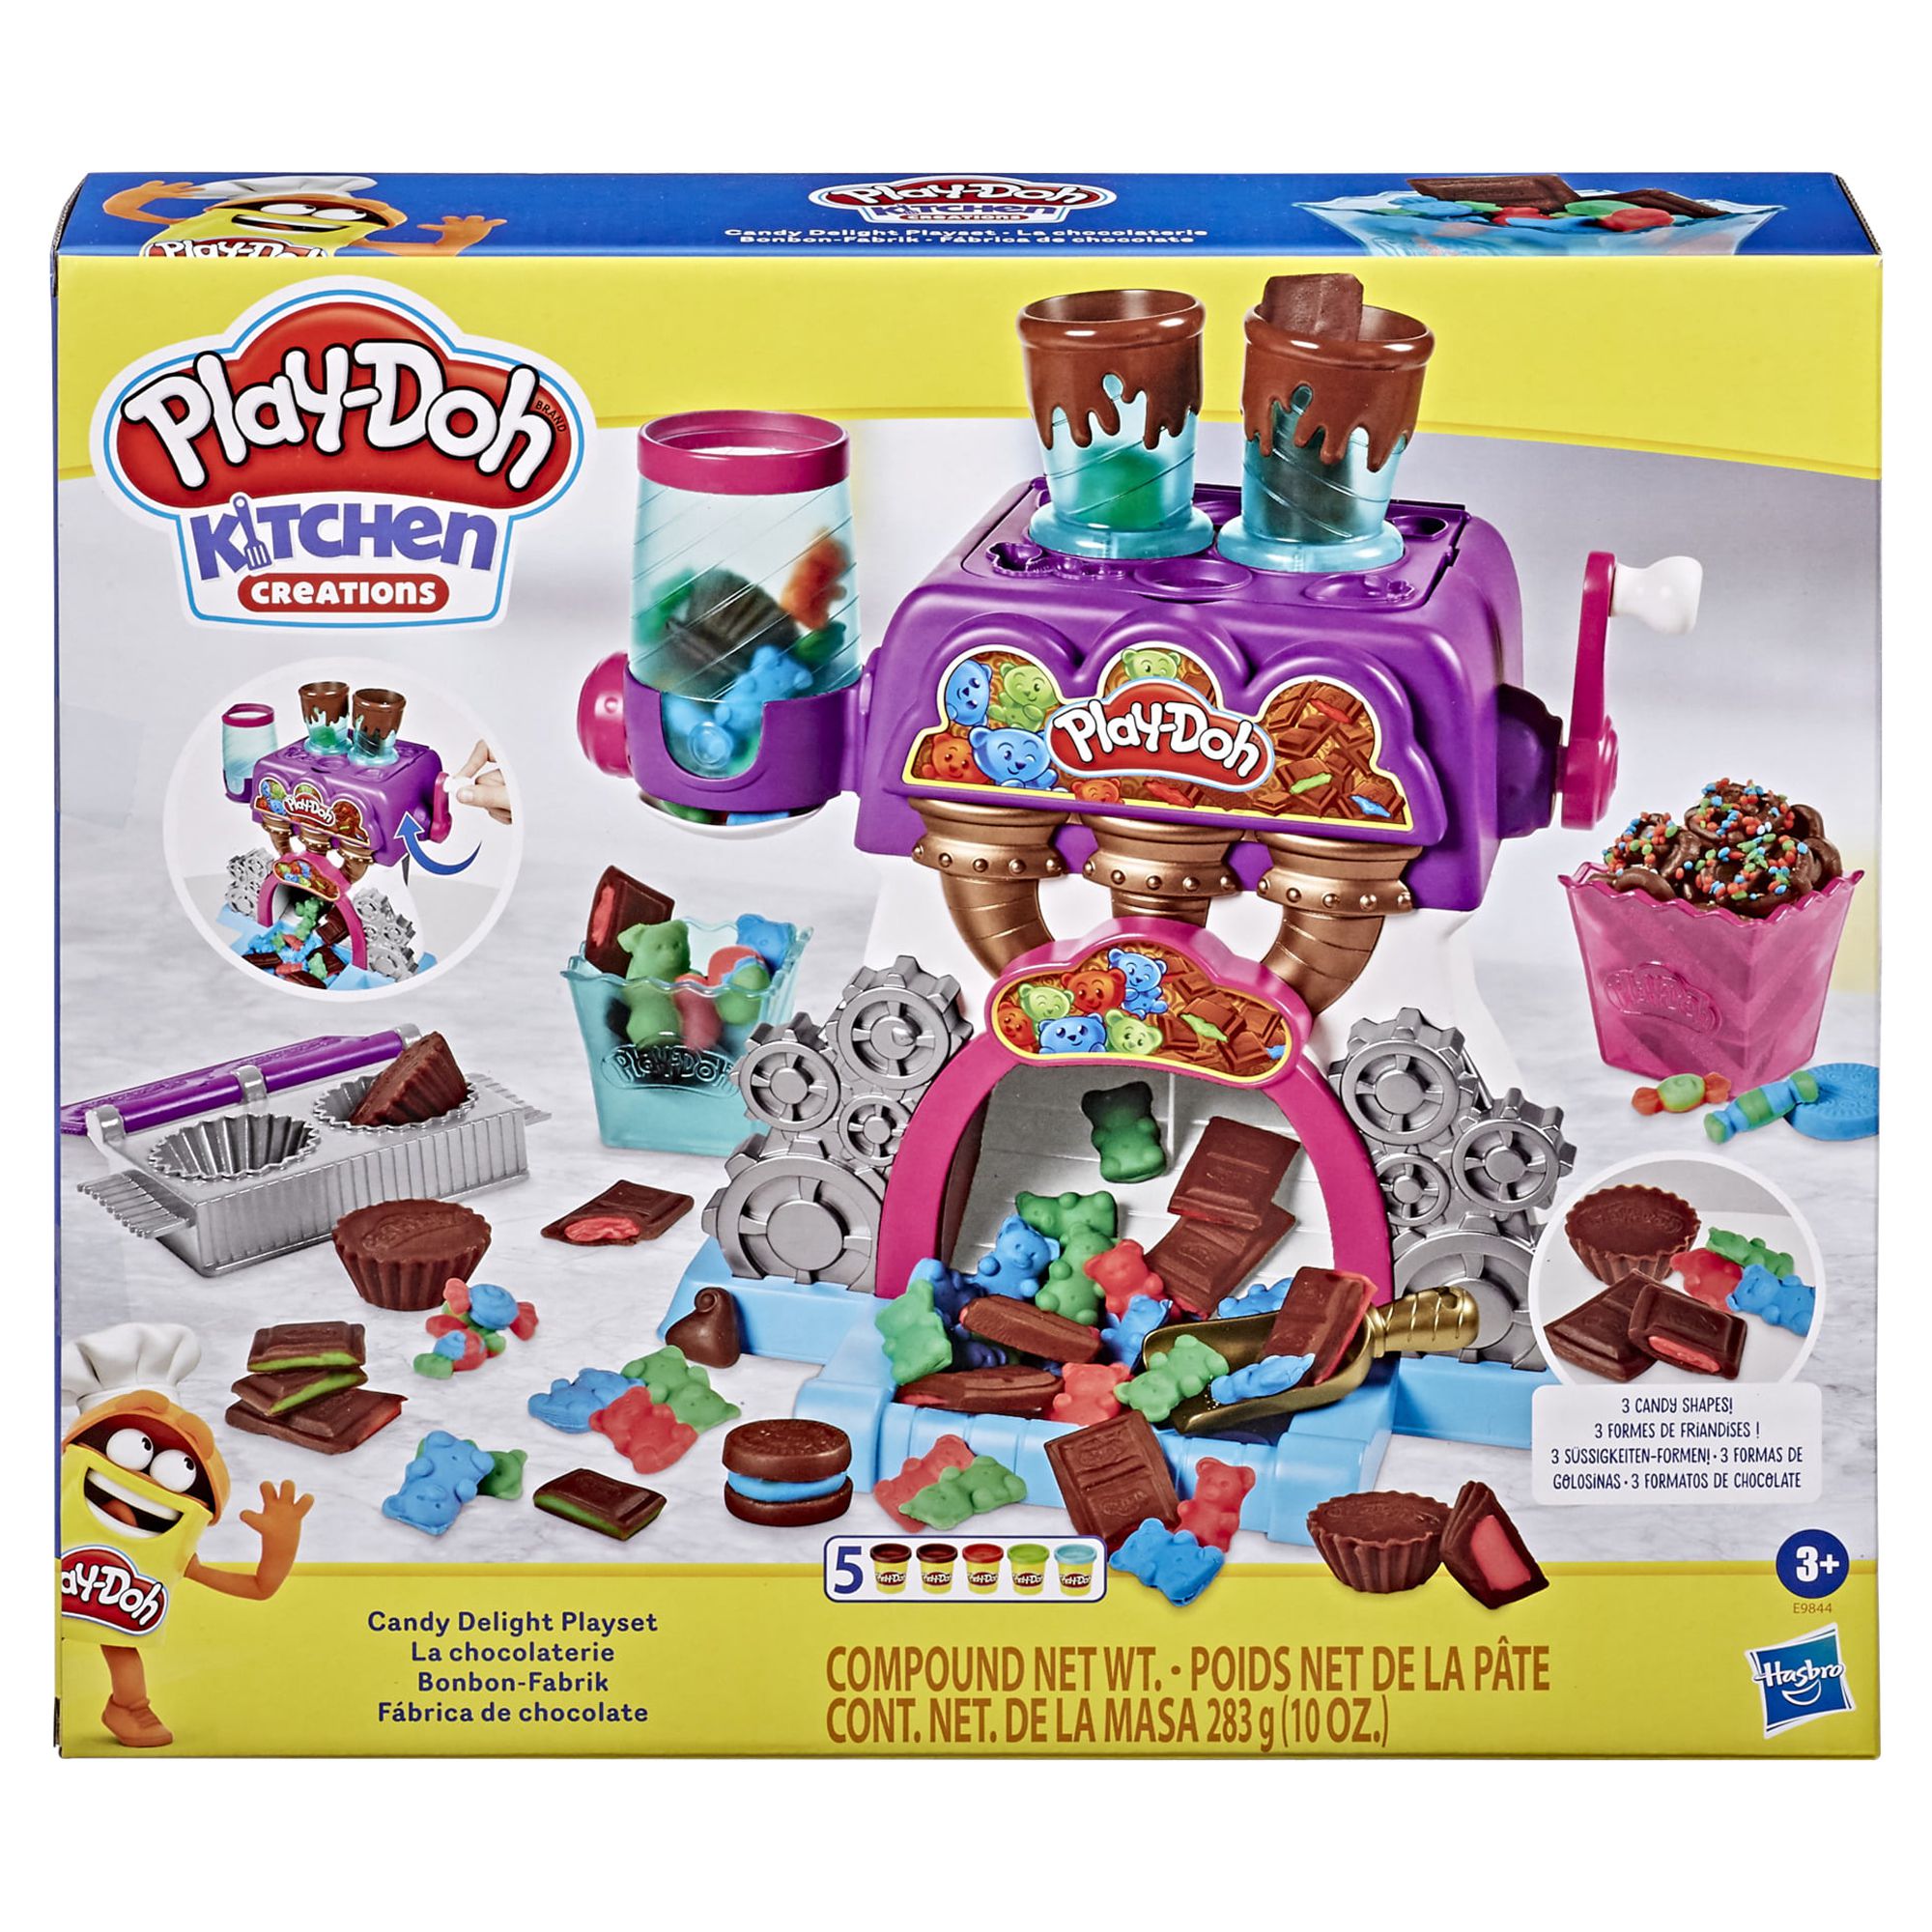 Play-Doh Kitchen Creations Candy Delight Play Dough Set - 5 Color (5 Piece) - image 3 of 11